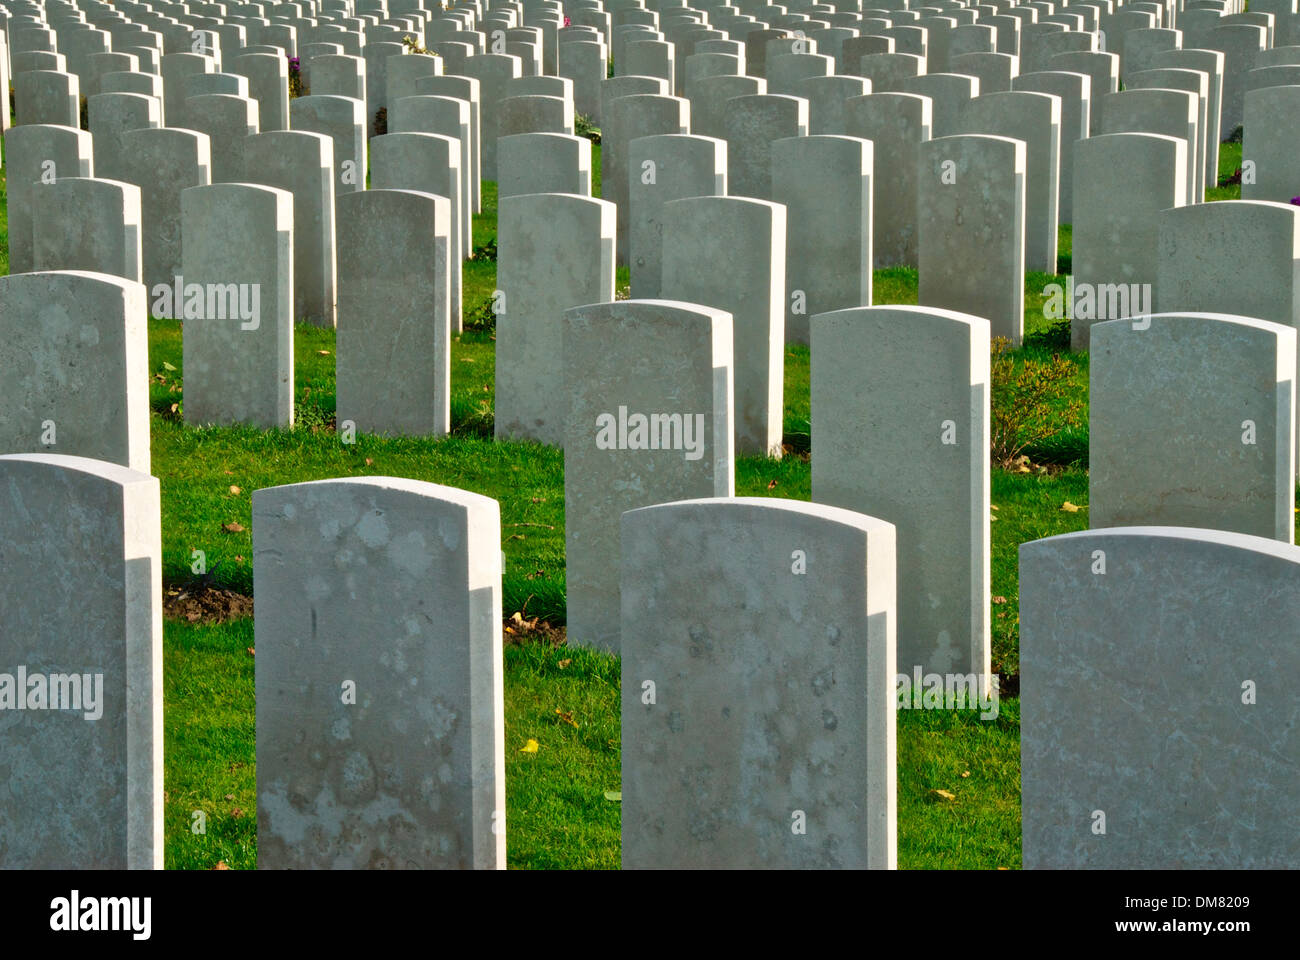 Cwgc Headstones High Resolution Stock Photography and Images - Alamy